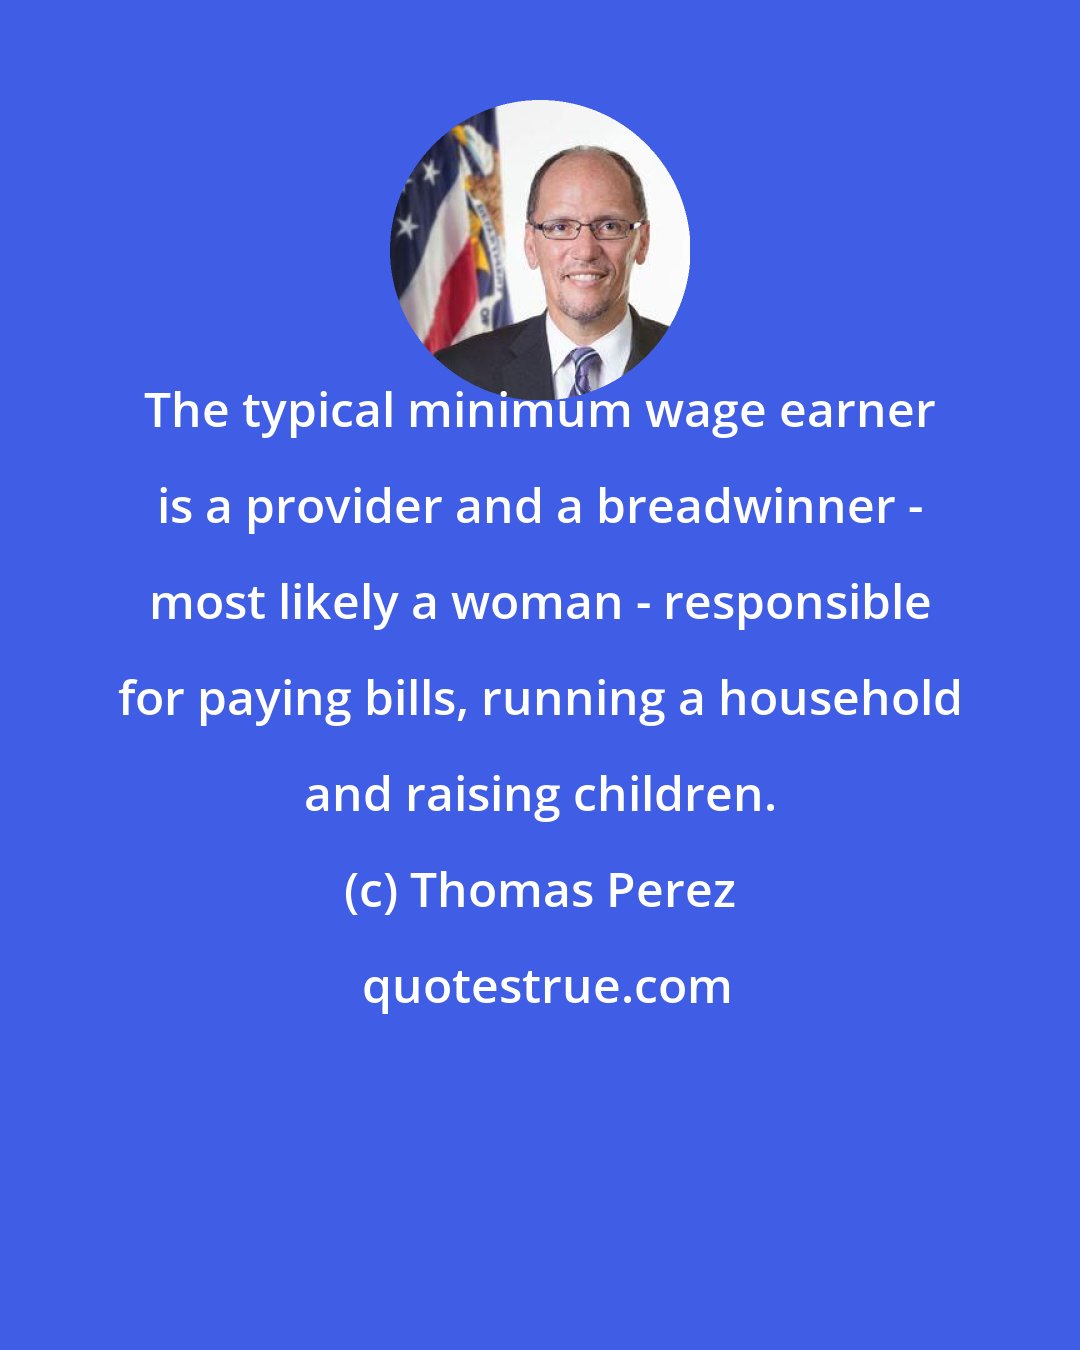 Thomas Perez: The typical minimum wage earner is a provider and a breadwinner - most likely a woman - responsible for paying bills, running a household and raising children.